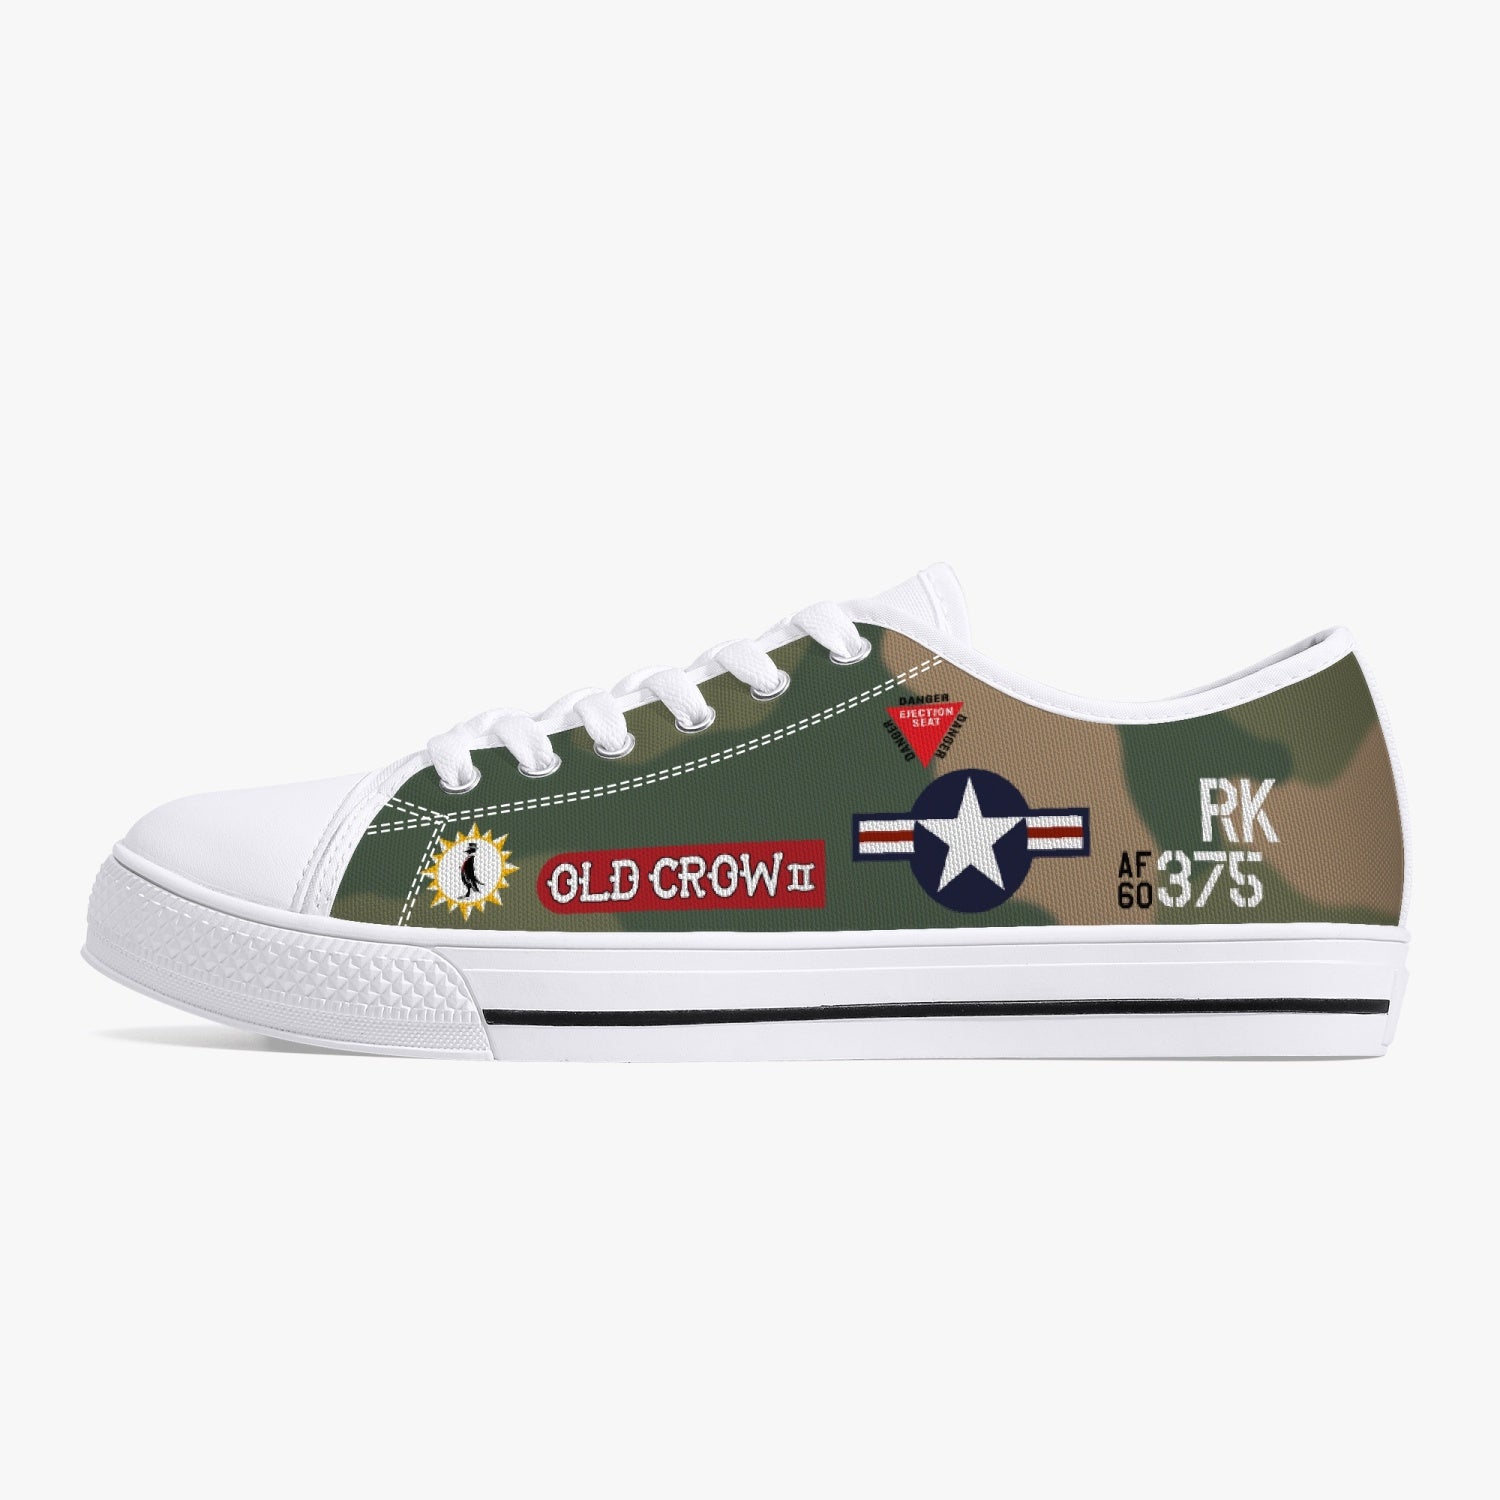 F-105 "Old Crow II" Low Top Canvas Shoes - I Love a Hangar